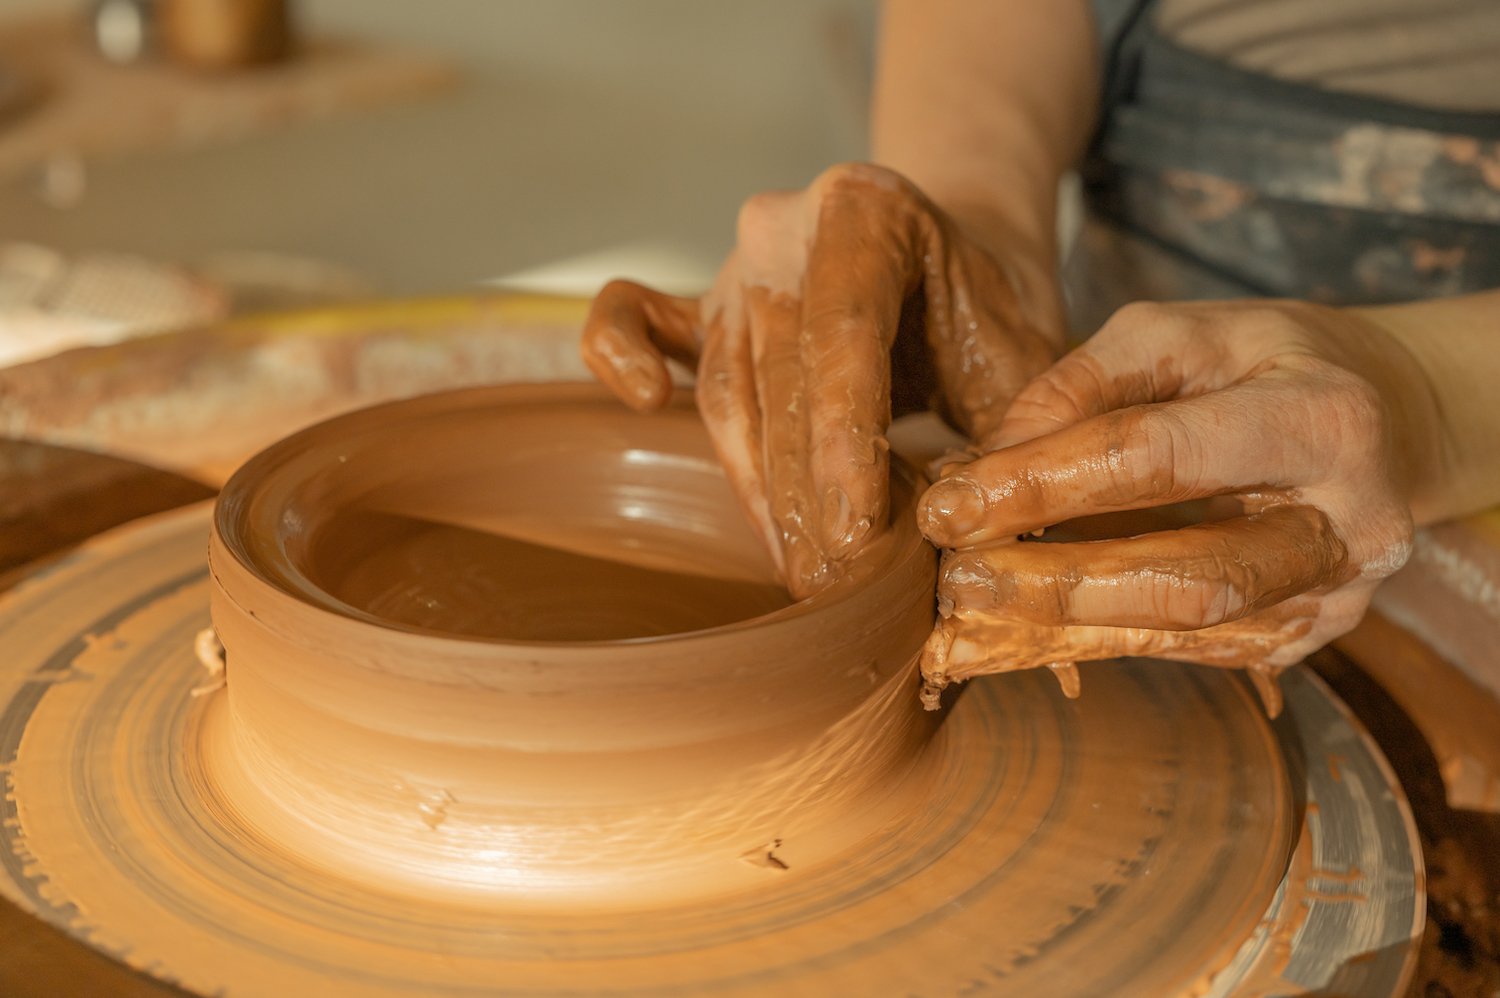 Opinion: “I have a new appreciation for pottery